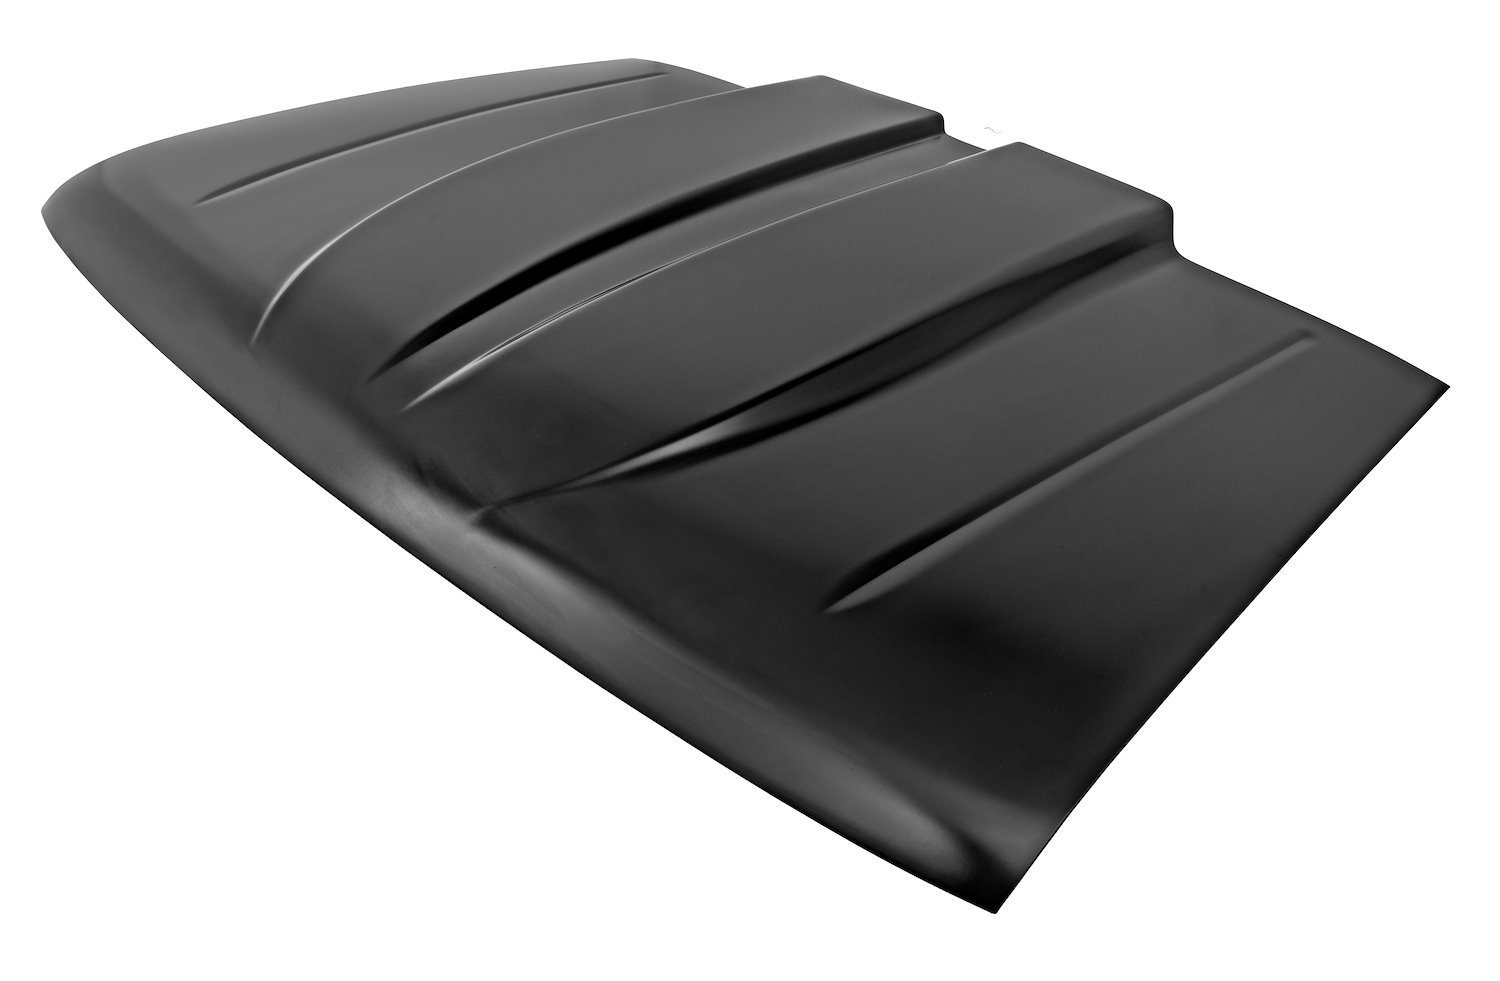 Cowl Induction Hood for 1993-1997 Ford Ranger [Dual Cowl]